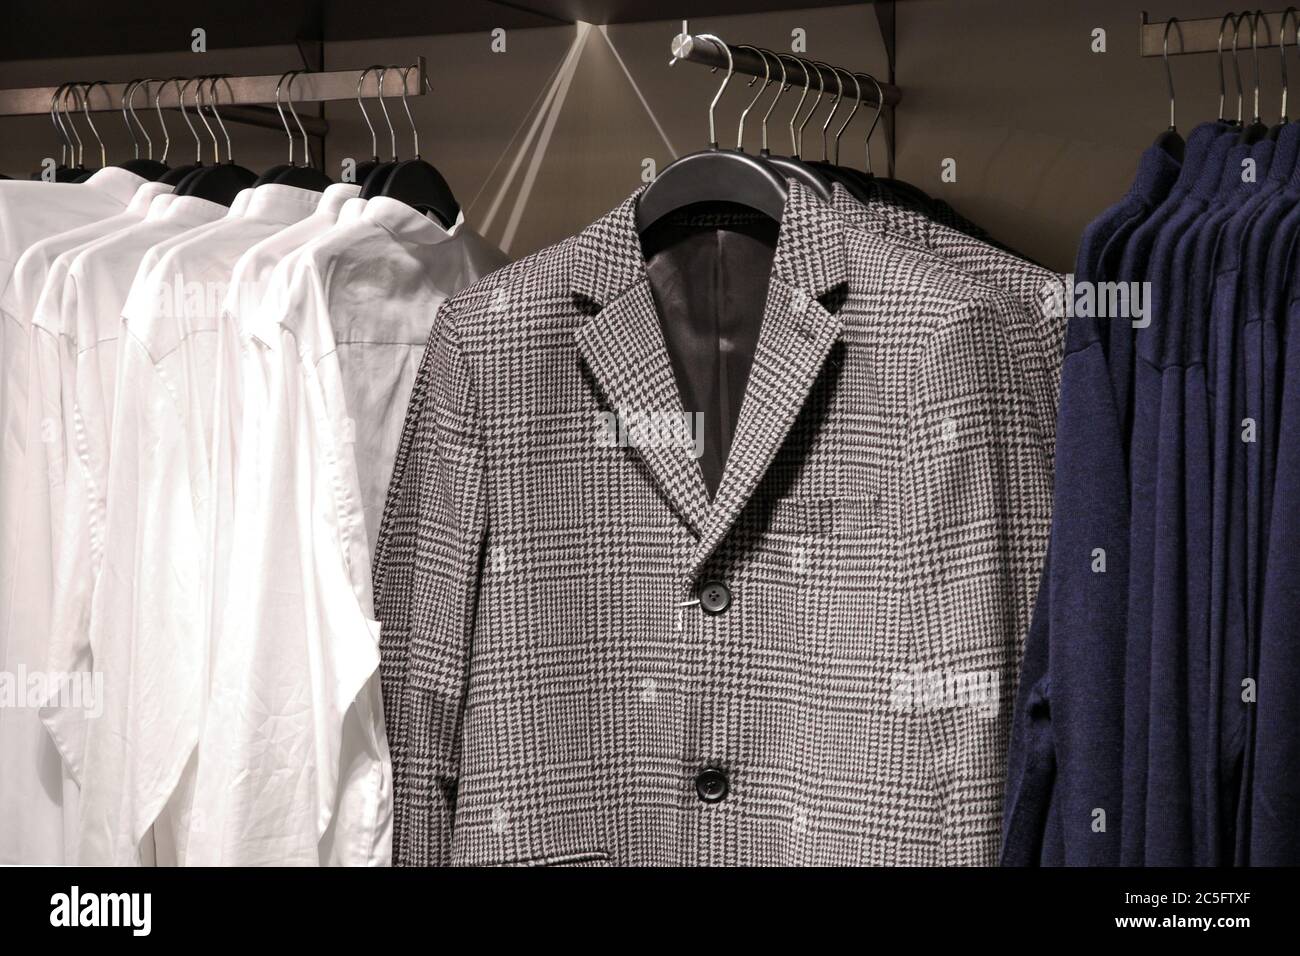 men's casual clothes in store, trendy jackets, shirts, cardigans on hangers Stock Photo